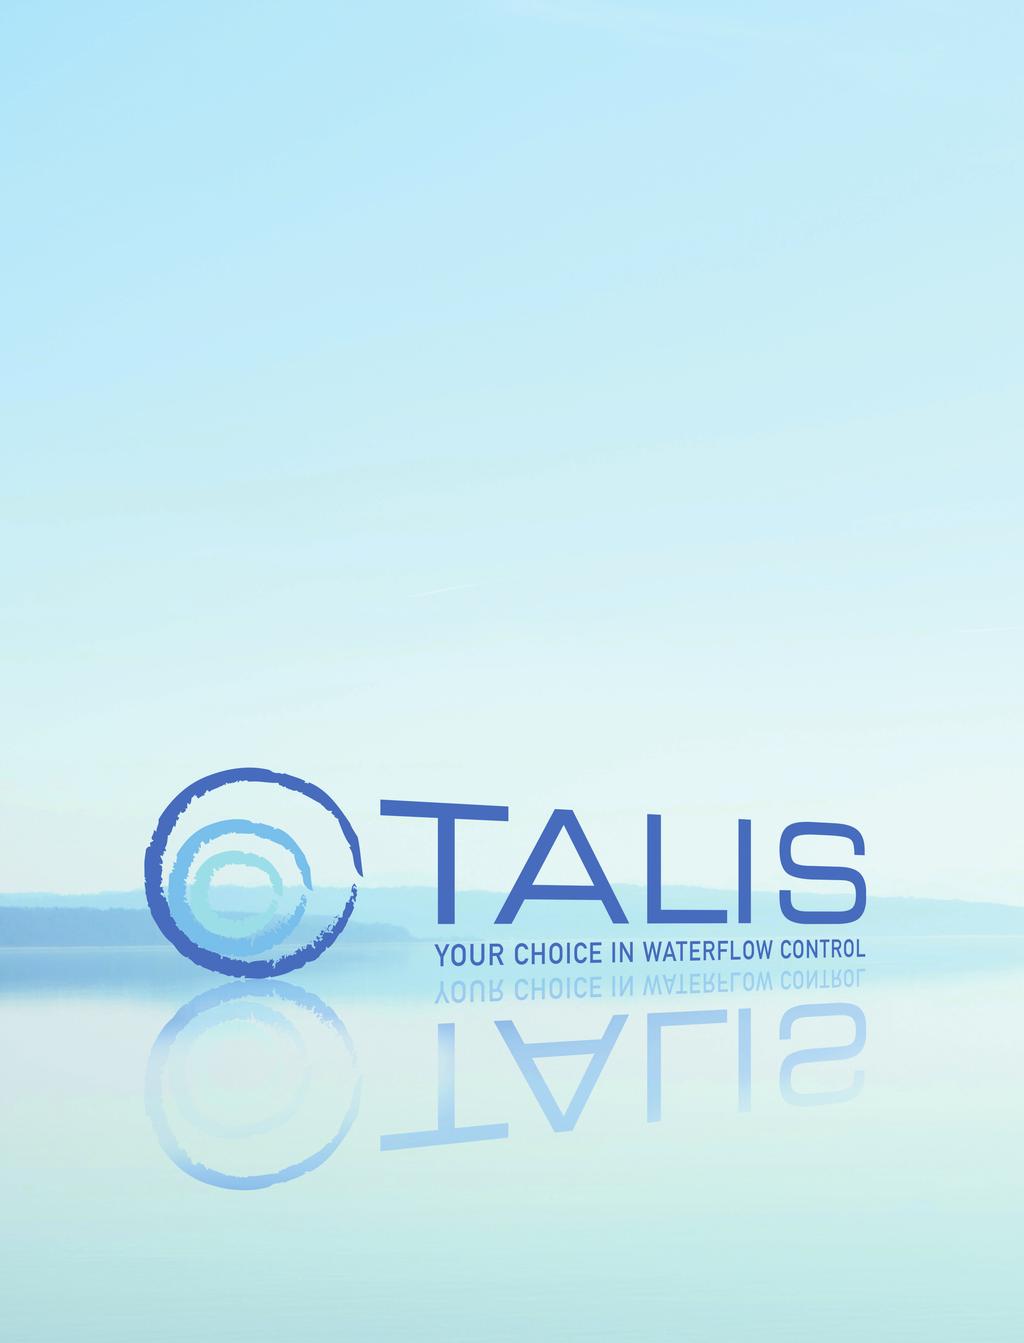 TALIS the number one choice for all valve-related products. TALIS is the major brand whenever products and services are needed for the water cycle.